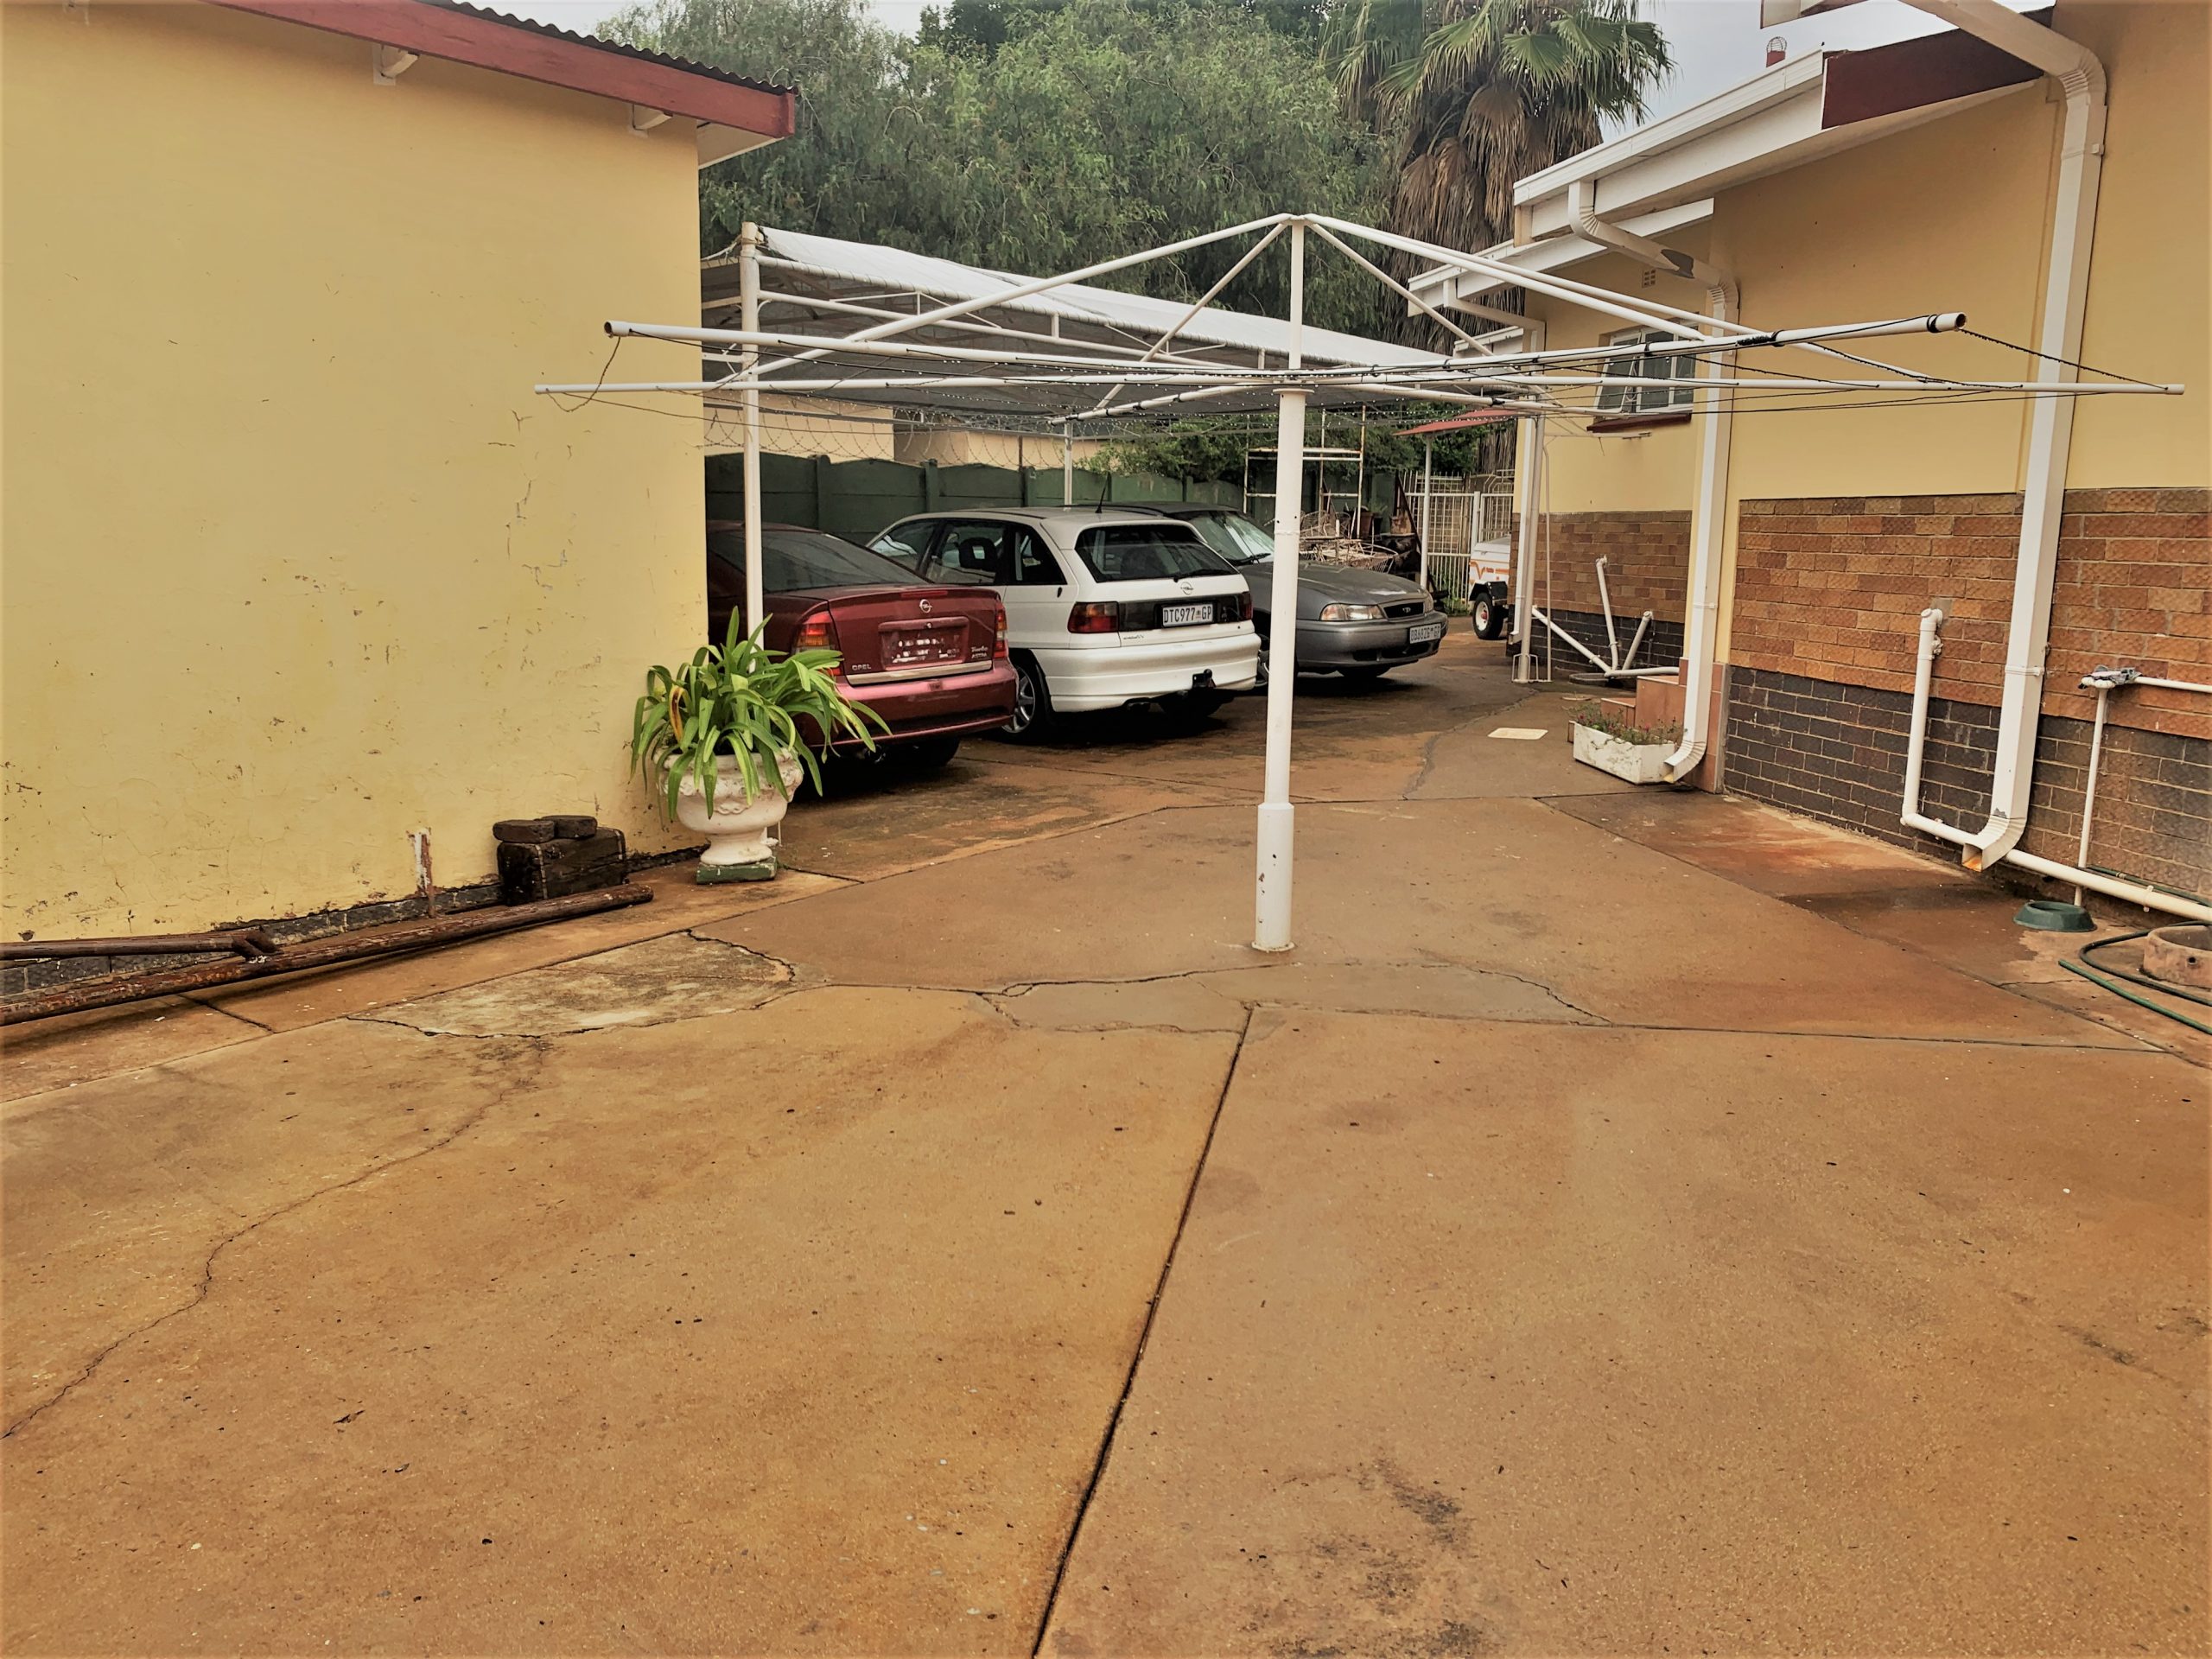 3 Bedroom House with Flatlet for SALE in Fochville